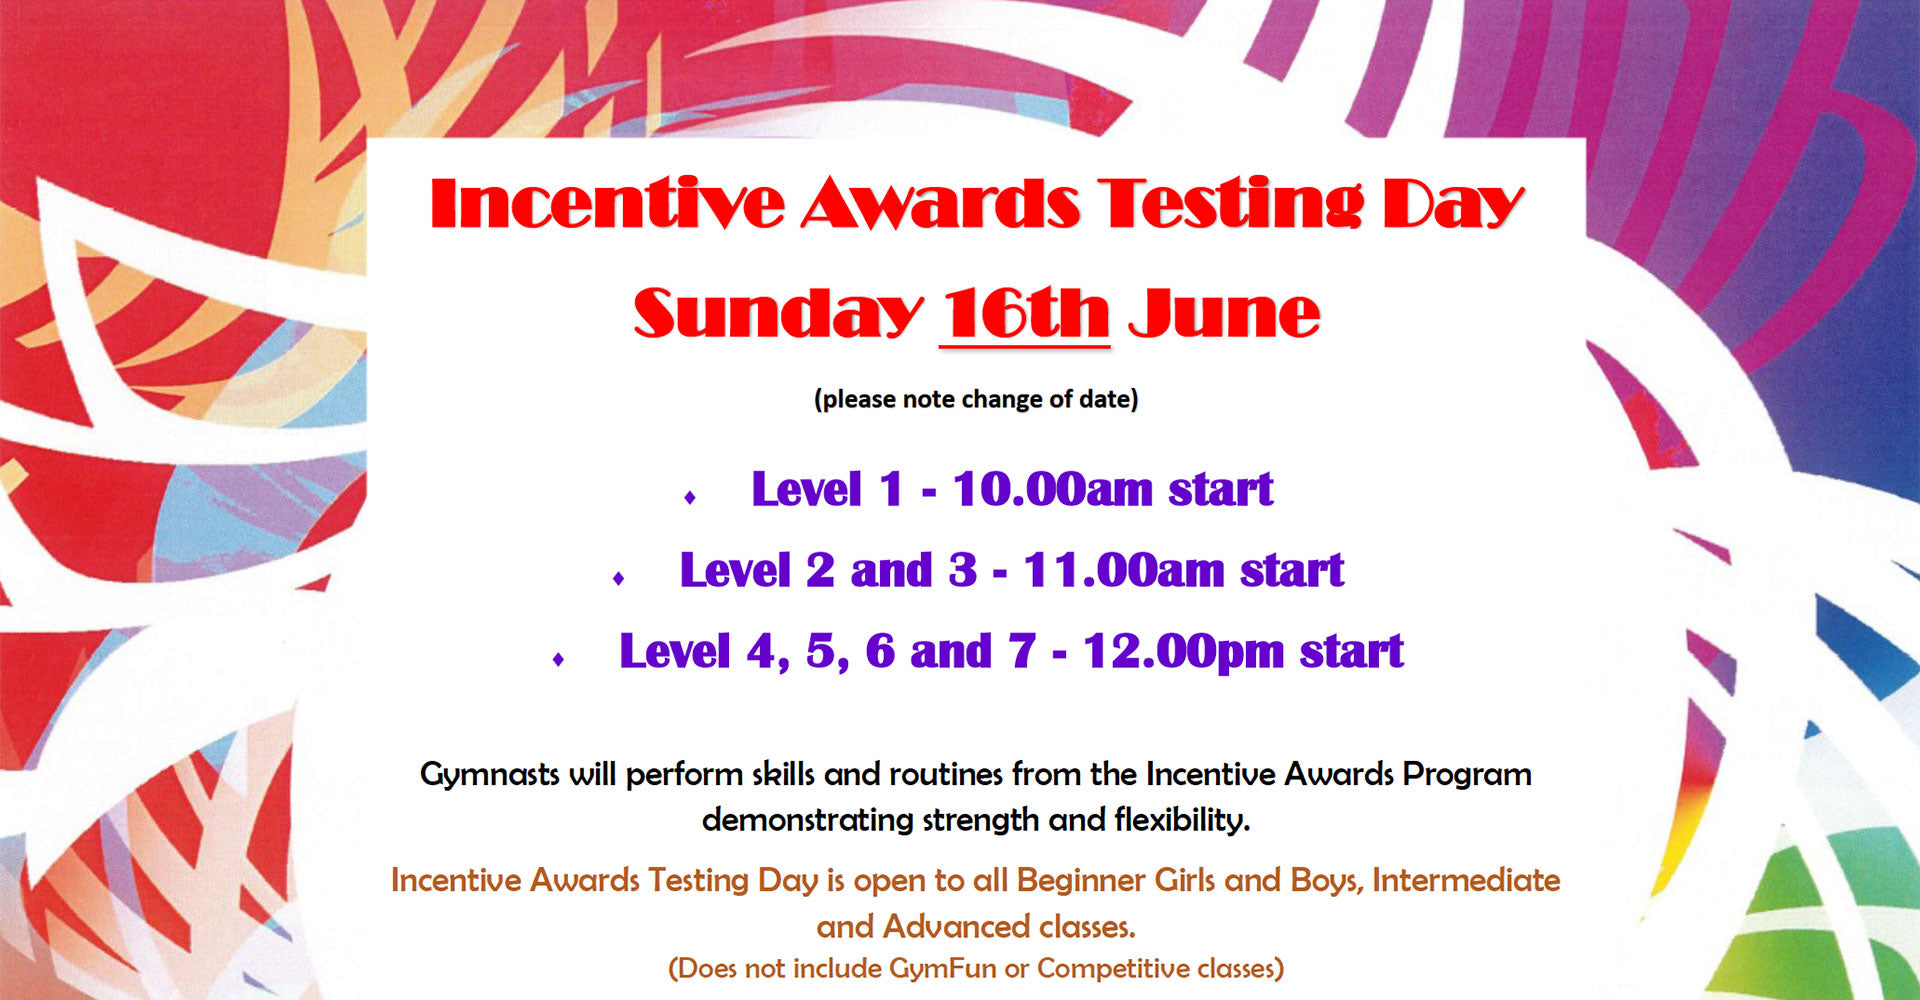 Incentive Awards - Sunday 16th June